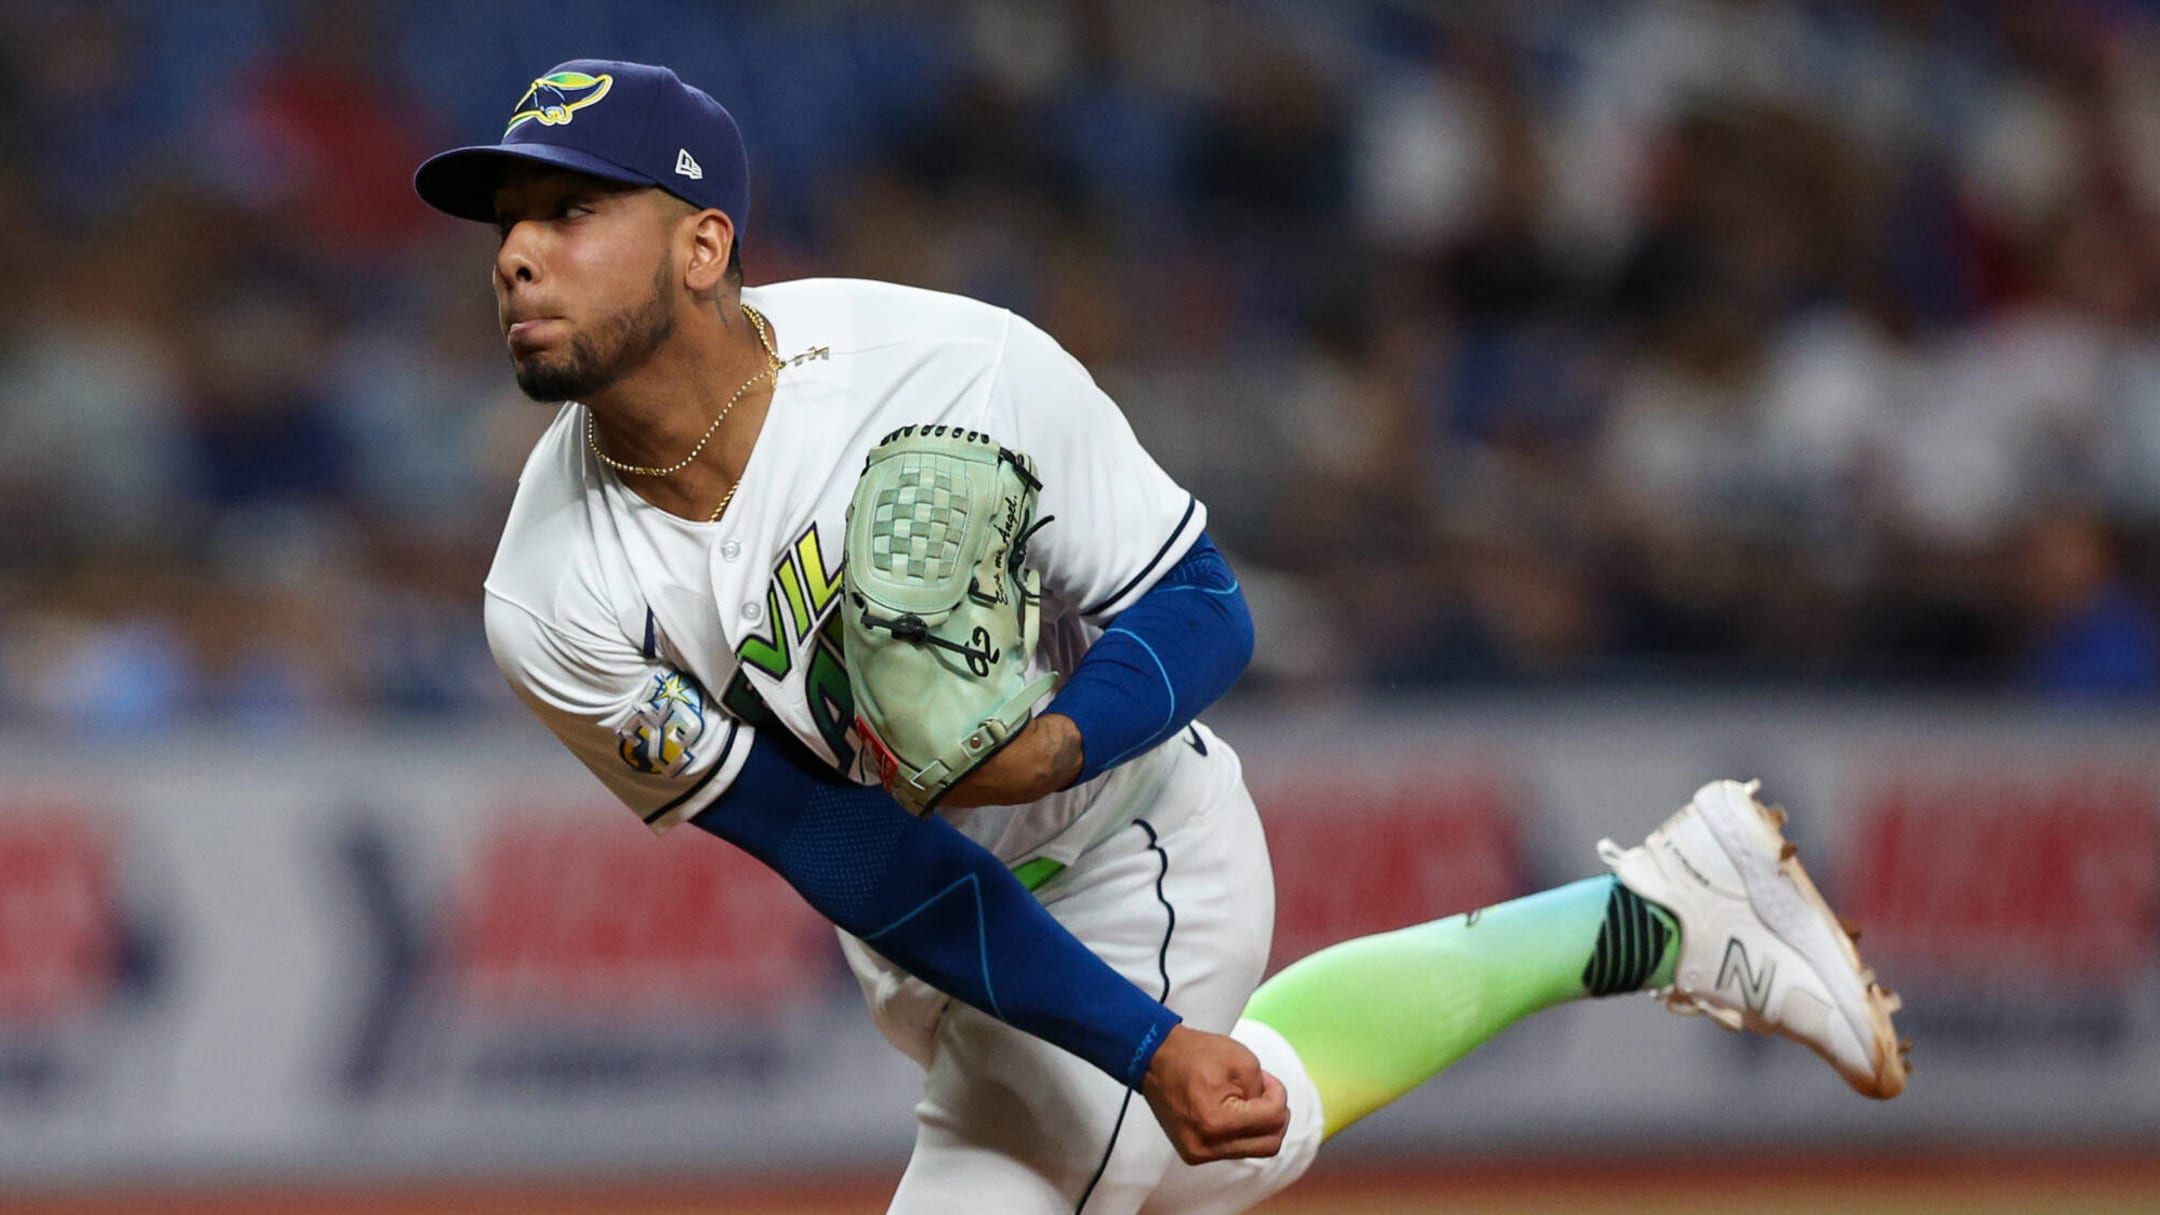 White Sox Land Luis Patiño in Trade with Rays